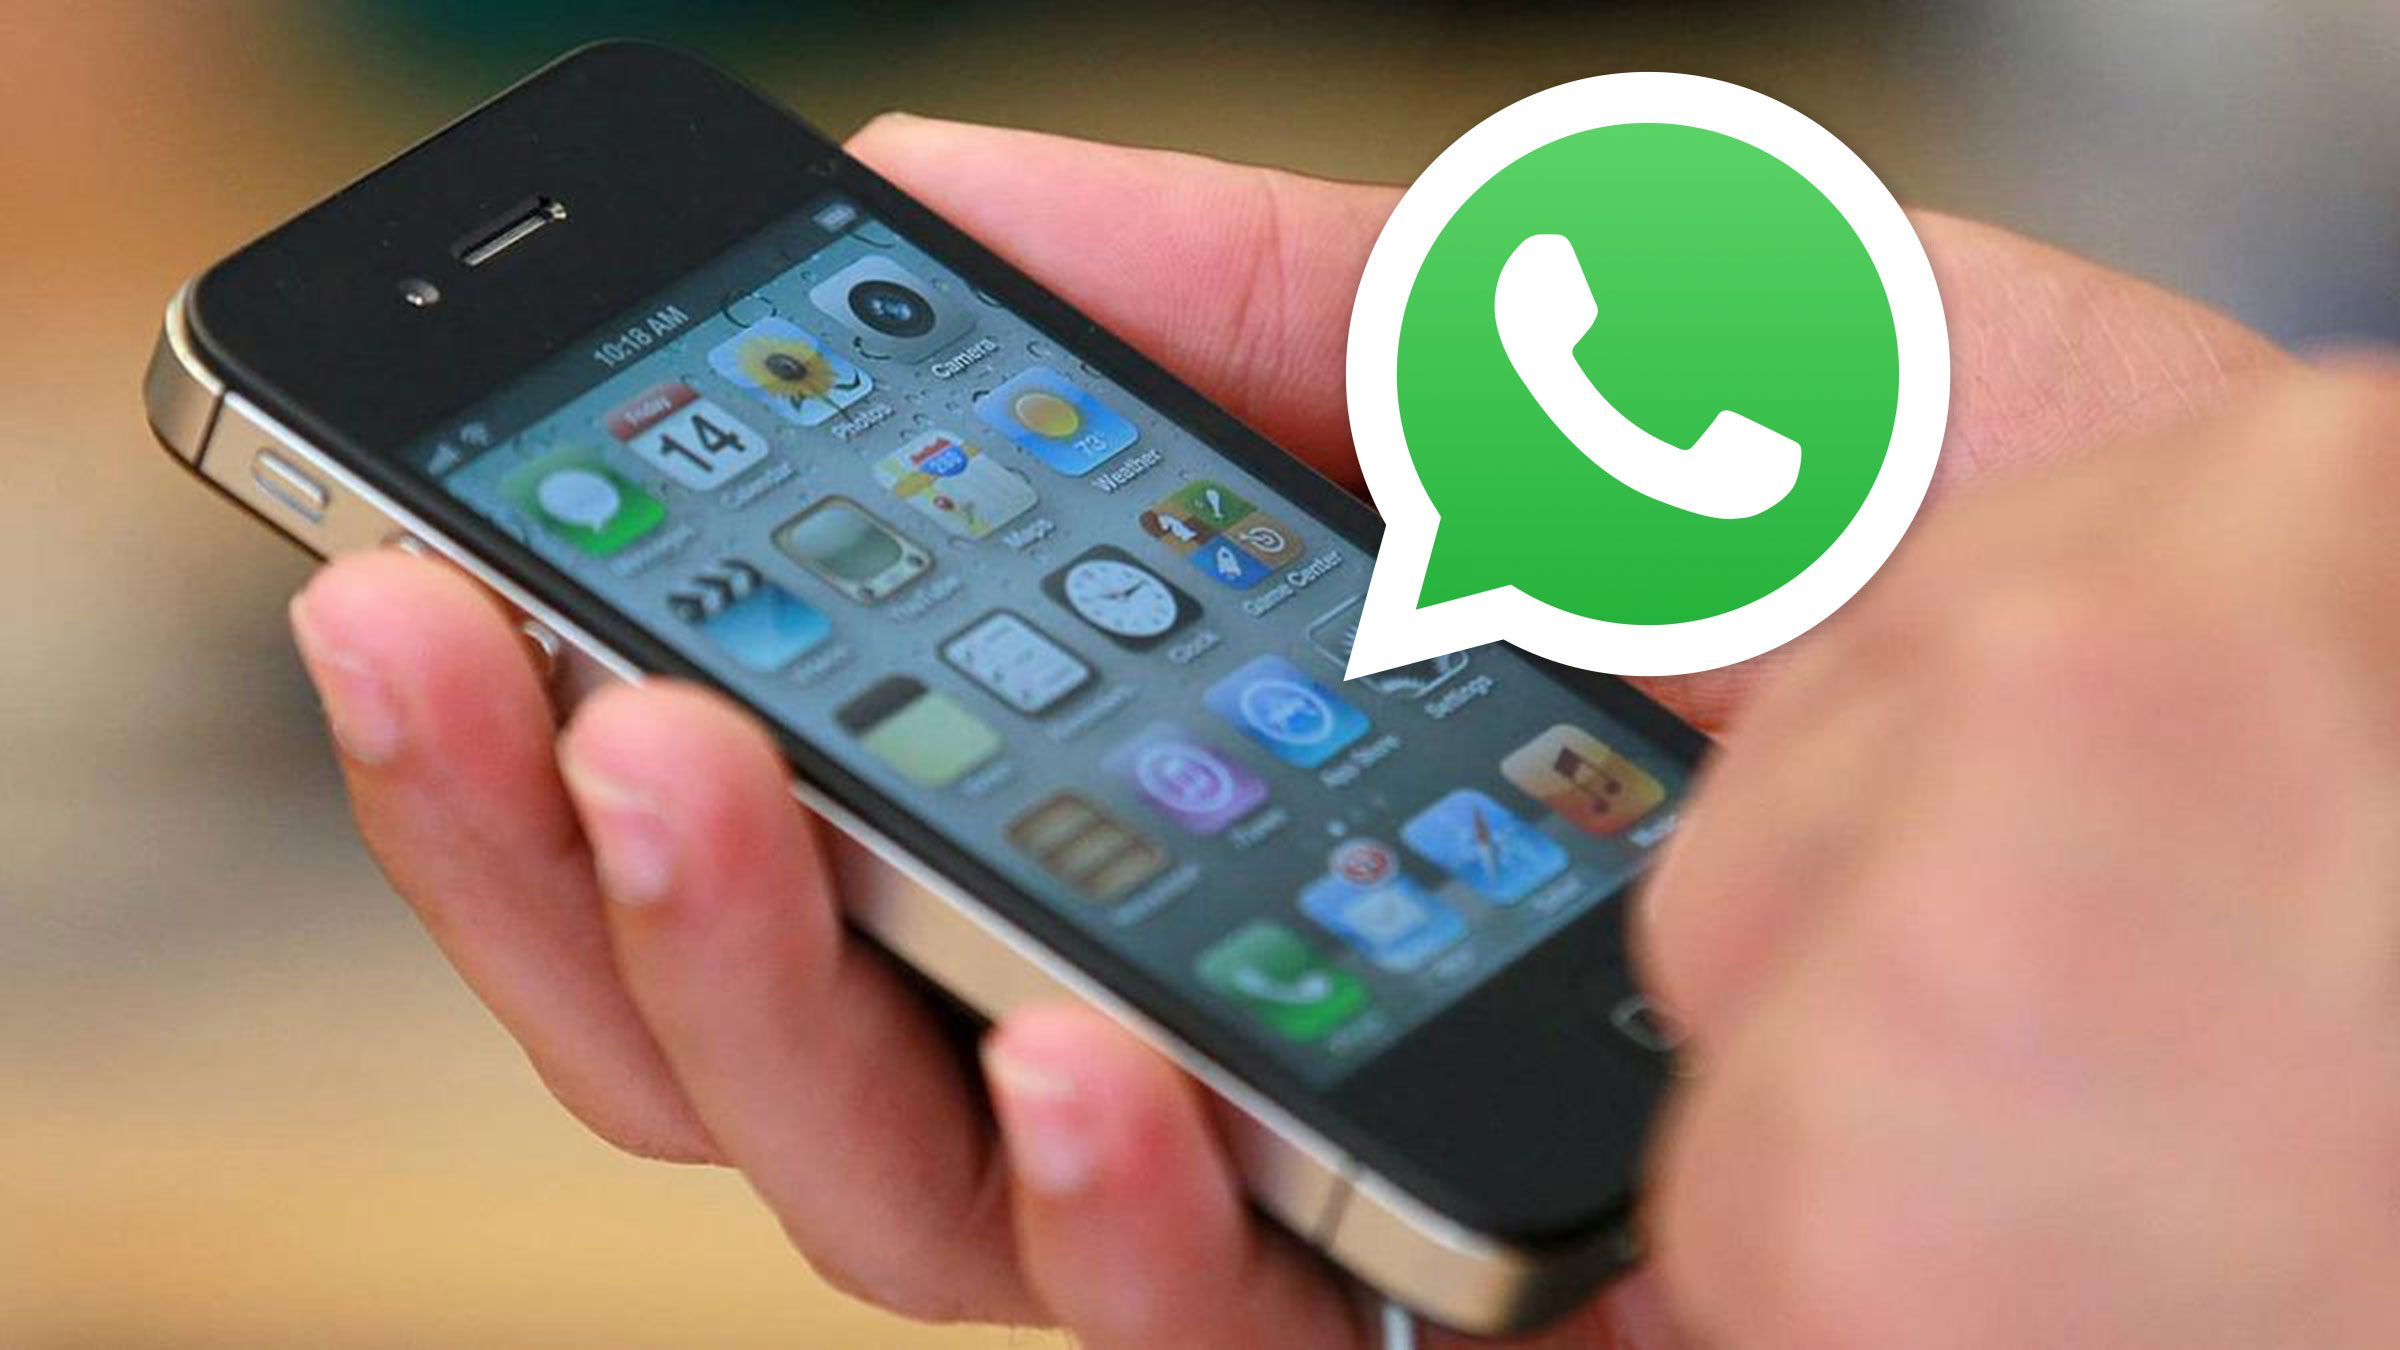 No more WhatsApp Services on These iPhone Models